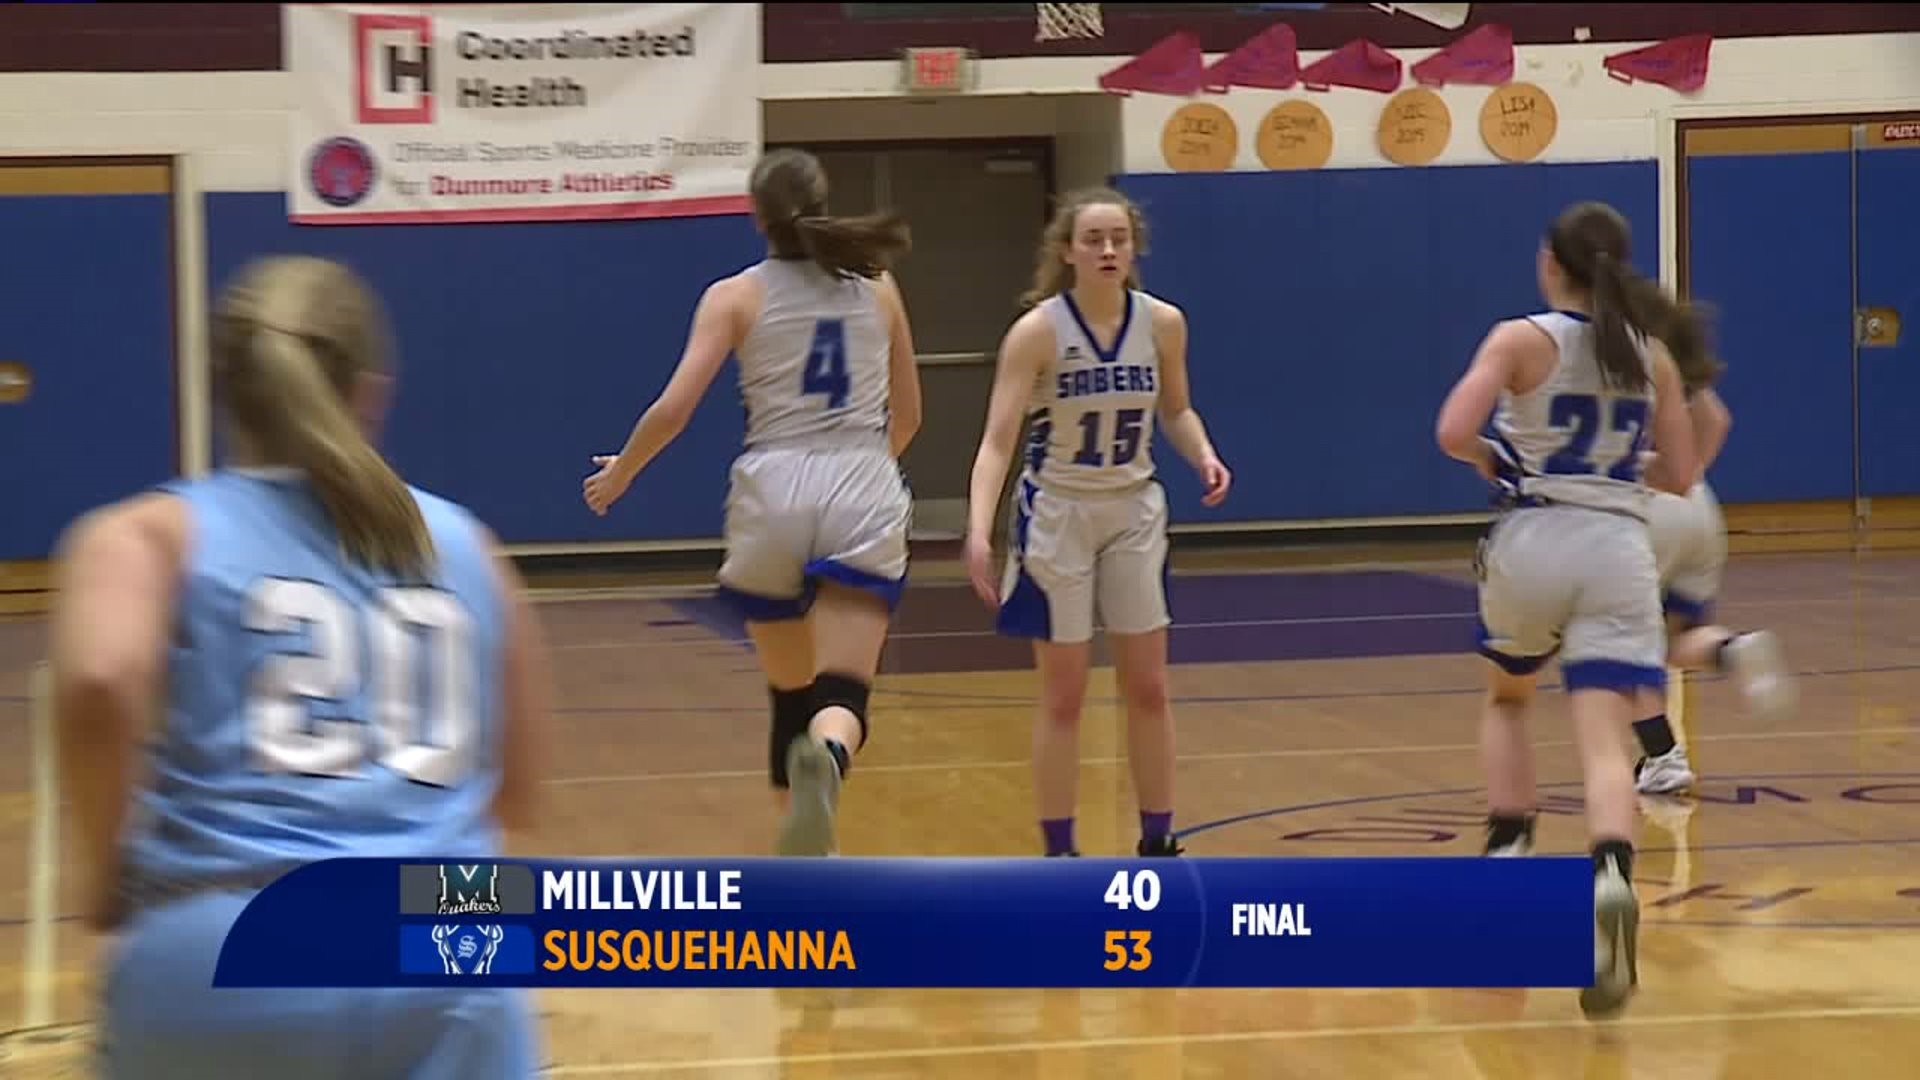 Susquehanna Comes Back Against Millville in Girls State Basketball